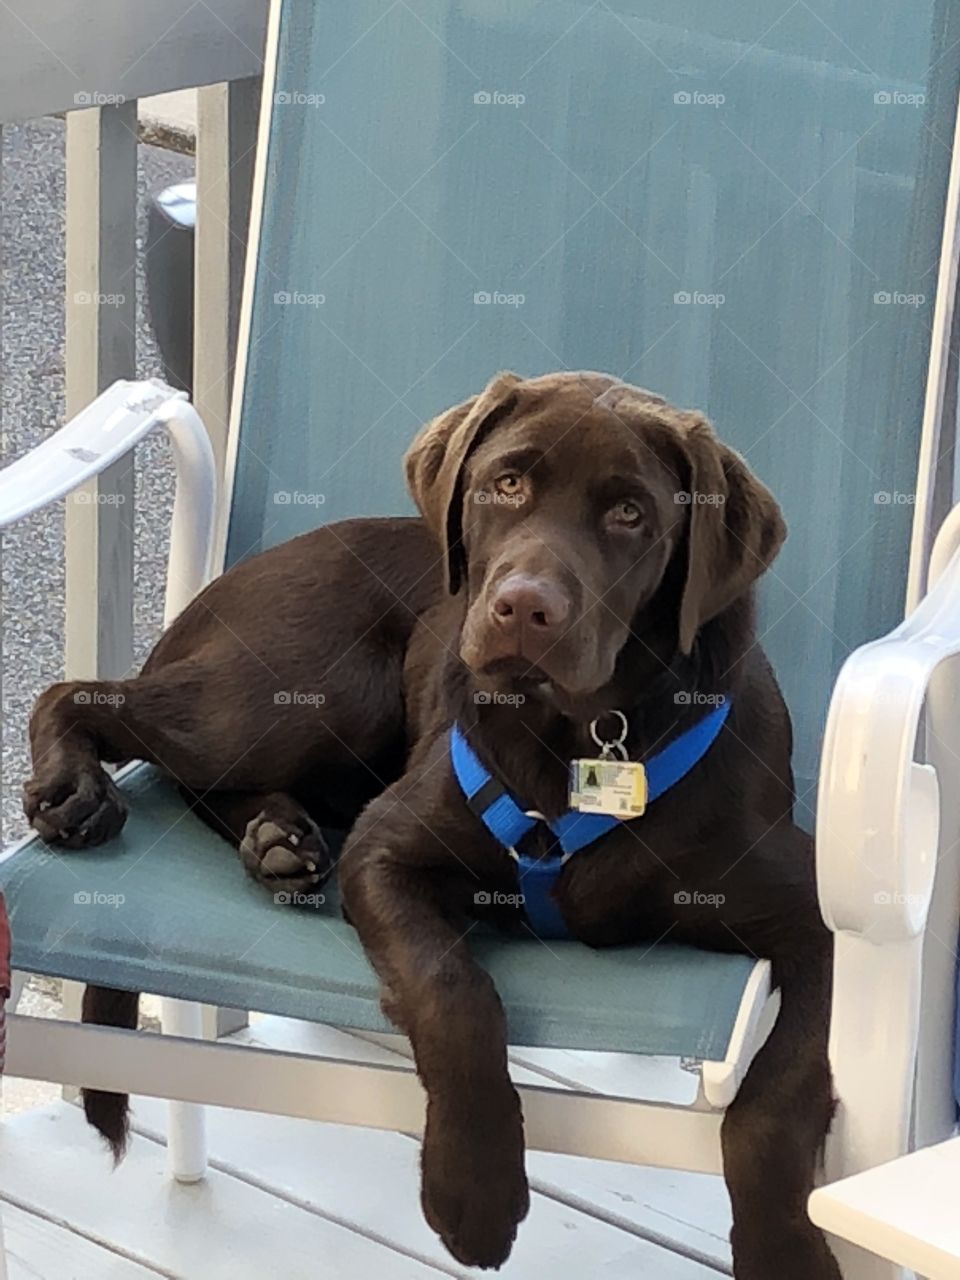 A chocolate lab puppy relaxes on a chair after a long day.